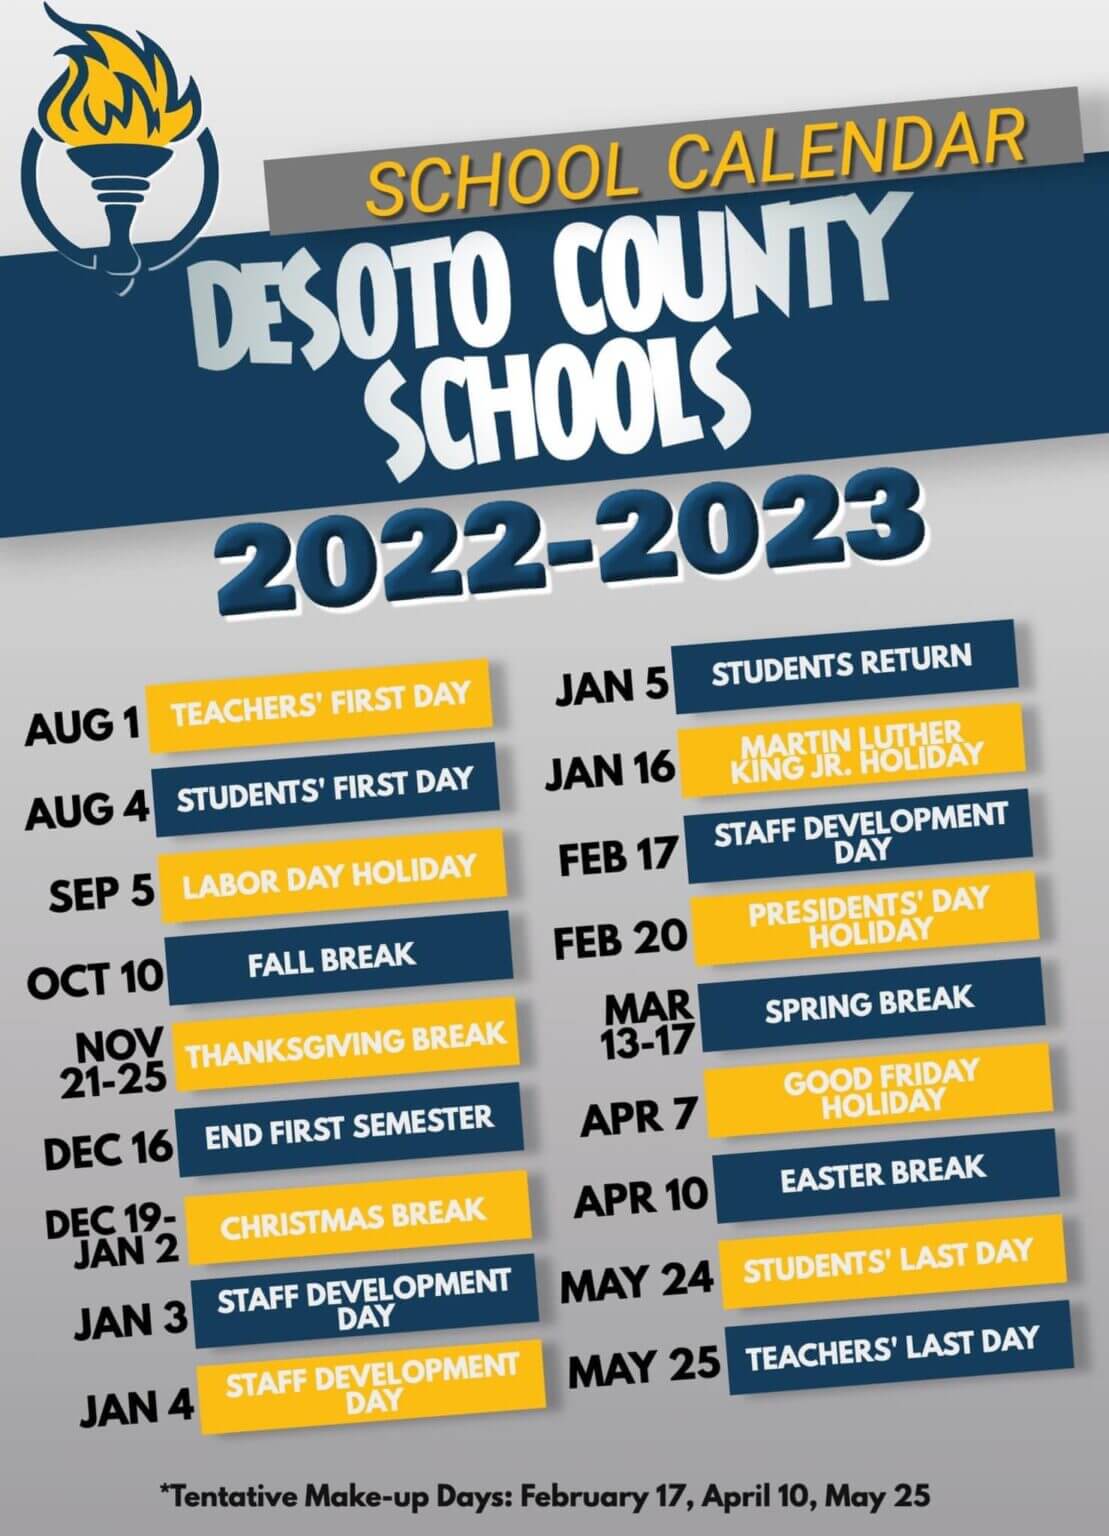 School calendar approved for 202223